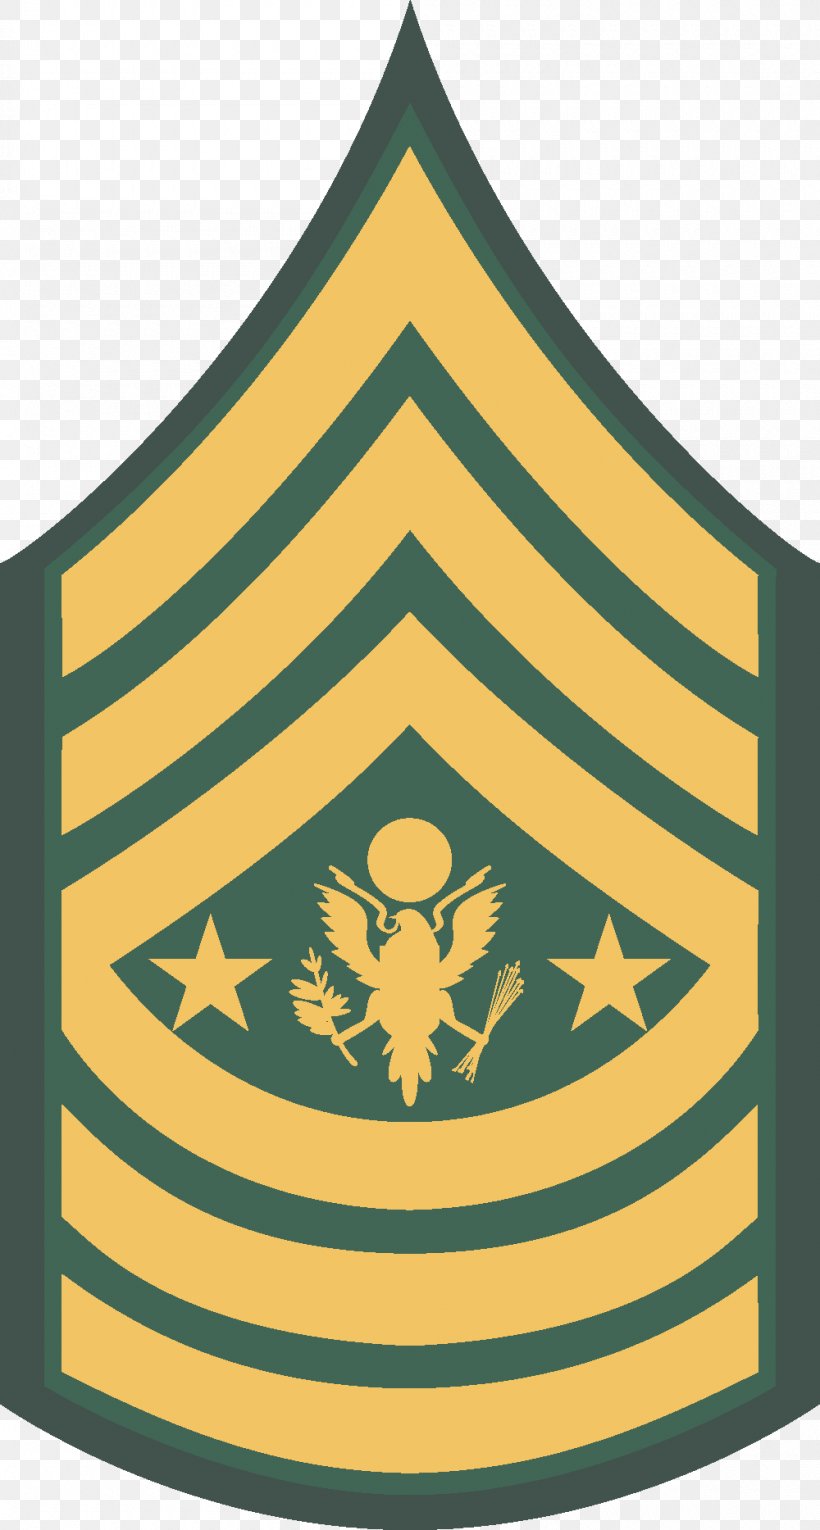 Sergeant Major Of The Army United States Army Enlisted Rank PNG X Px Sergeant Major Of